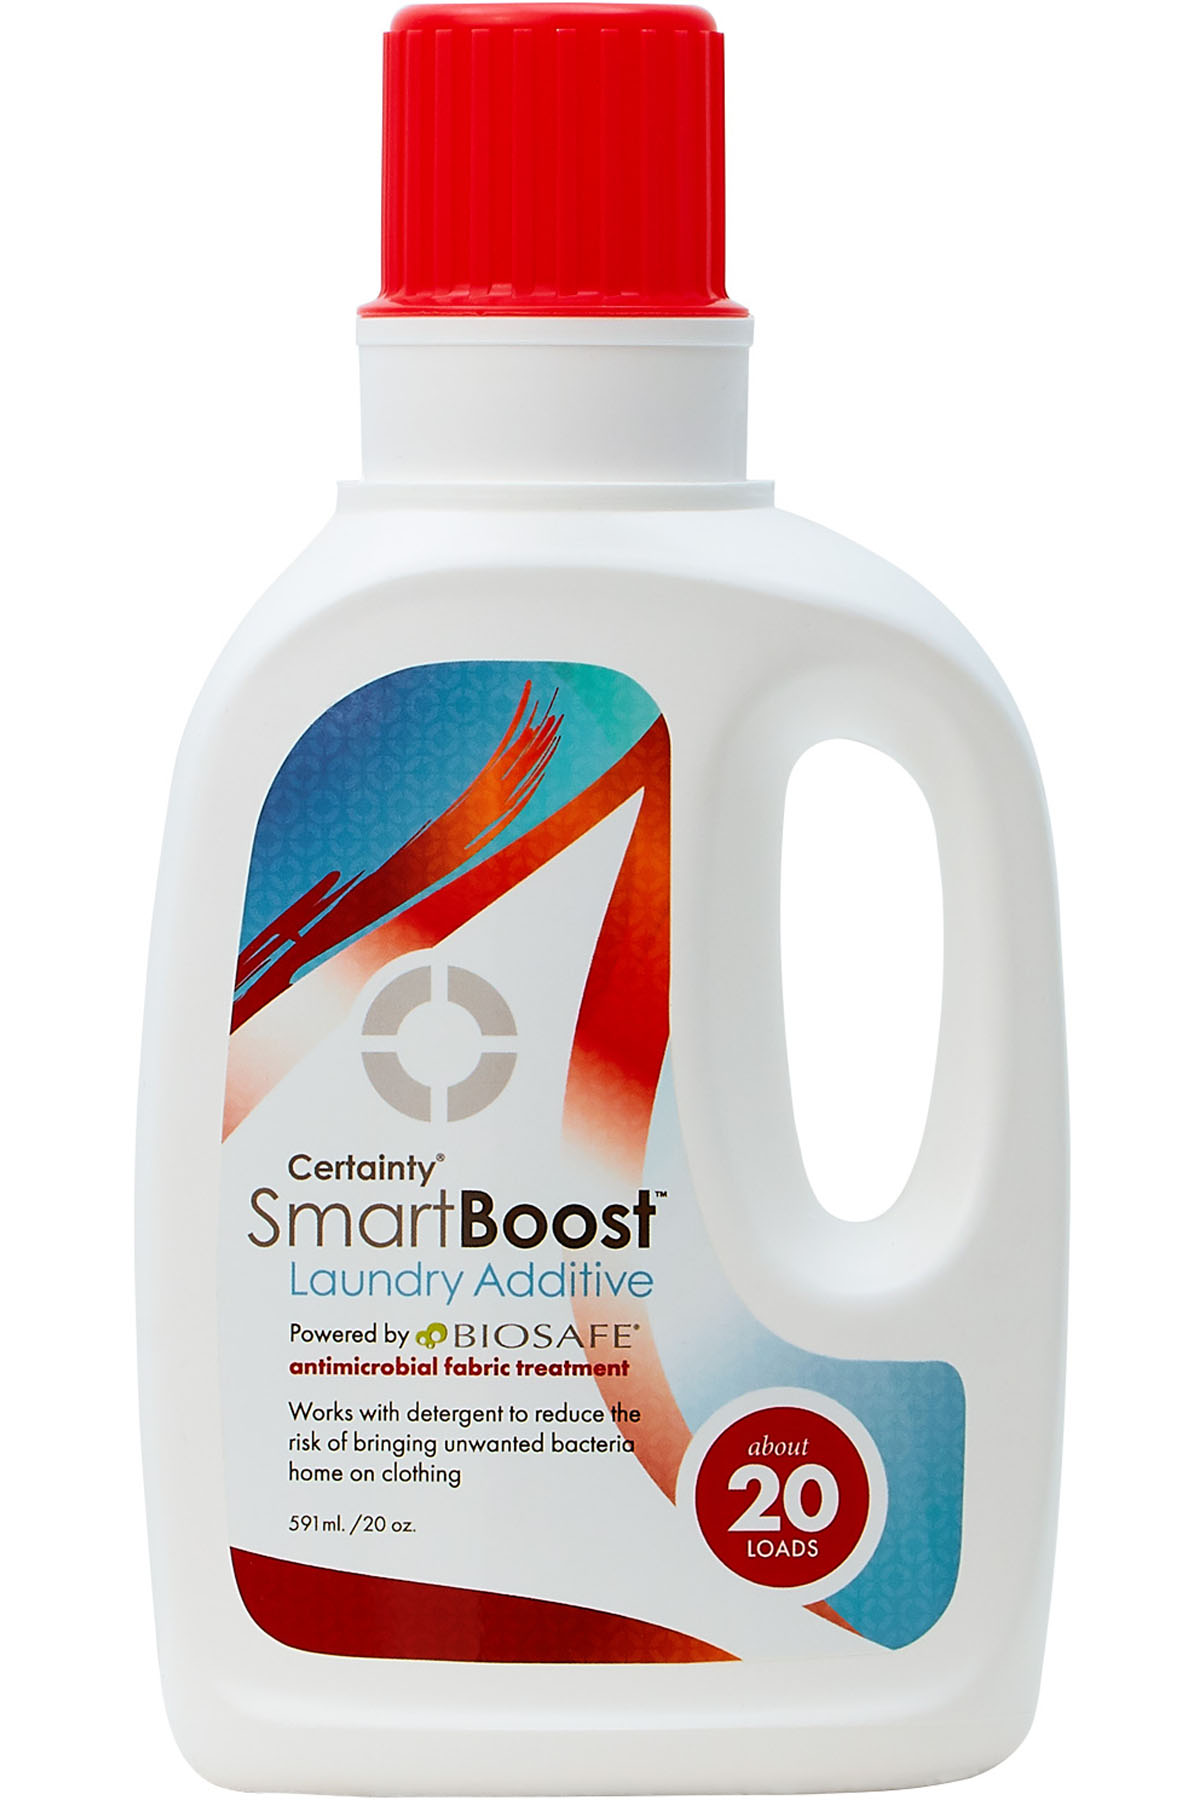 CU_CSB Medical Laundry Additive Certainty SmartBoost + AM-Certainty